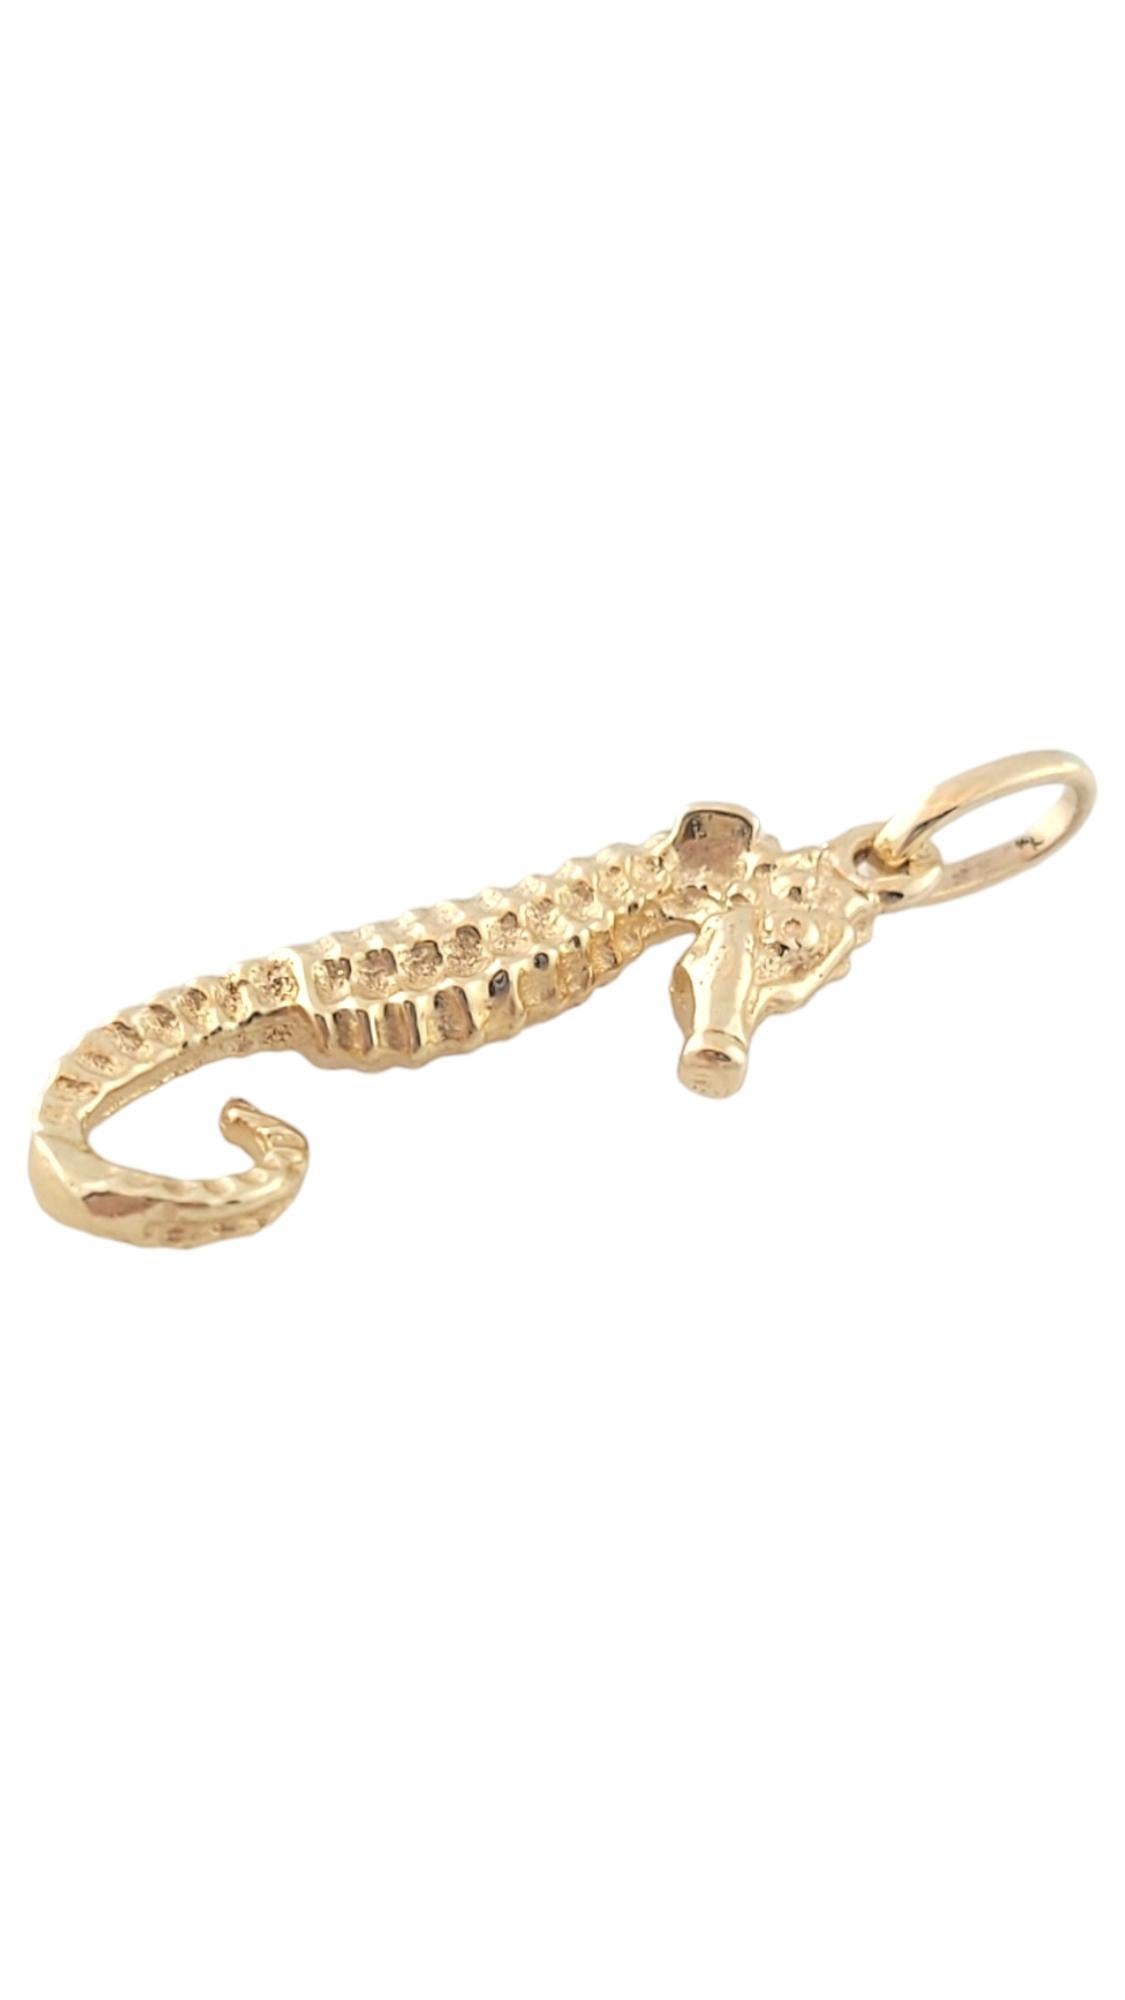 Vintage 14K Yellow Gold Seahorse Charm 

This adorable seahorse charm is crafted from 14K yellow gold with meticulous detail!

Size: 22.95mm X 6.71mm X 3.58mm

Weight: 1.1 dwt/ 1.7 g

Hallmark: 14K

Very good condition, professionally